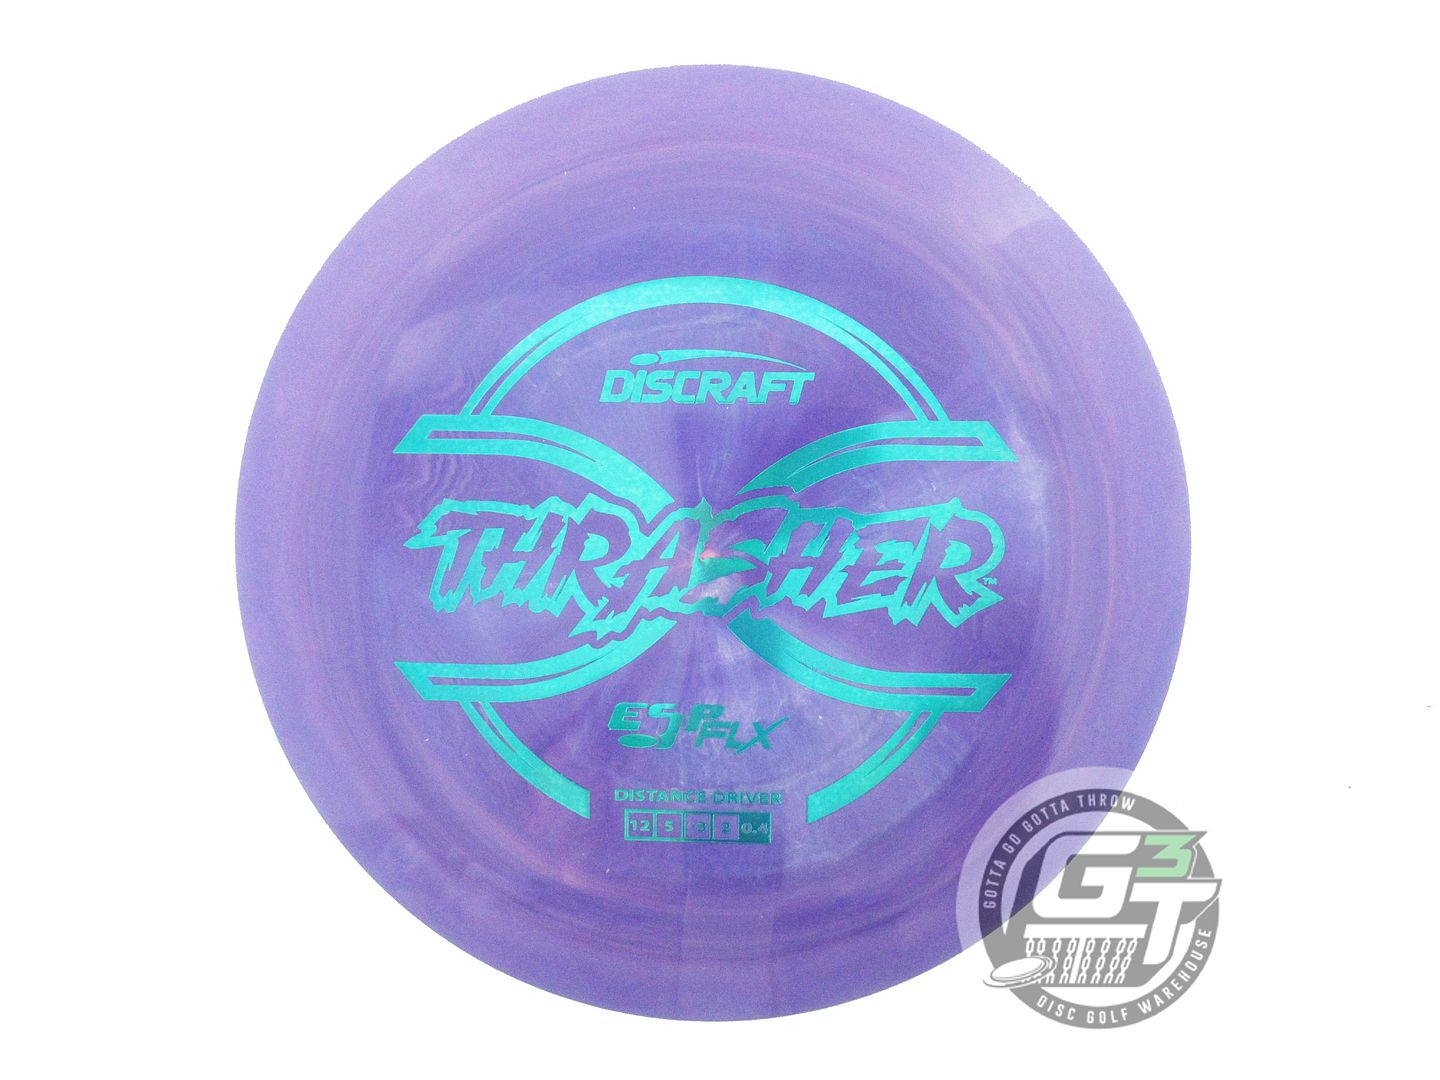 Discraft ESP FLX Thrasher Distance Driver Golf Disc (Individually Listed)